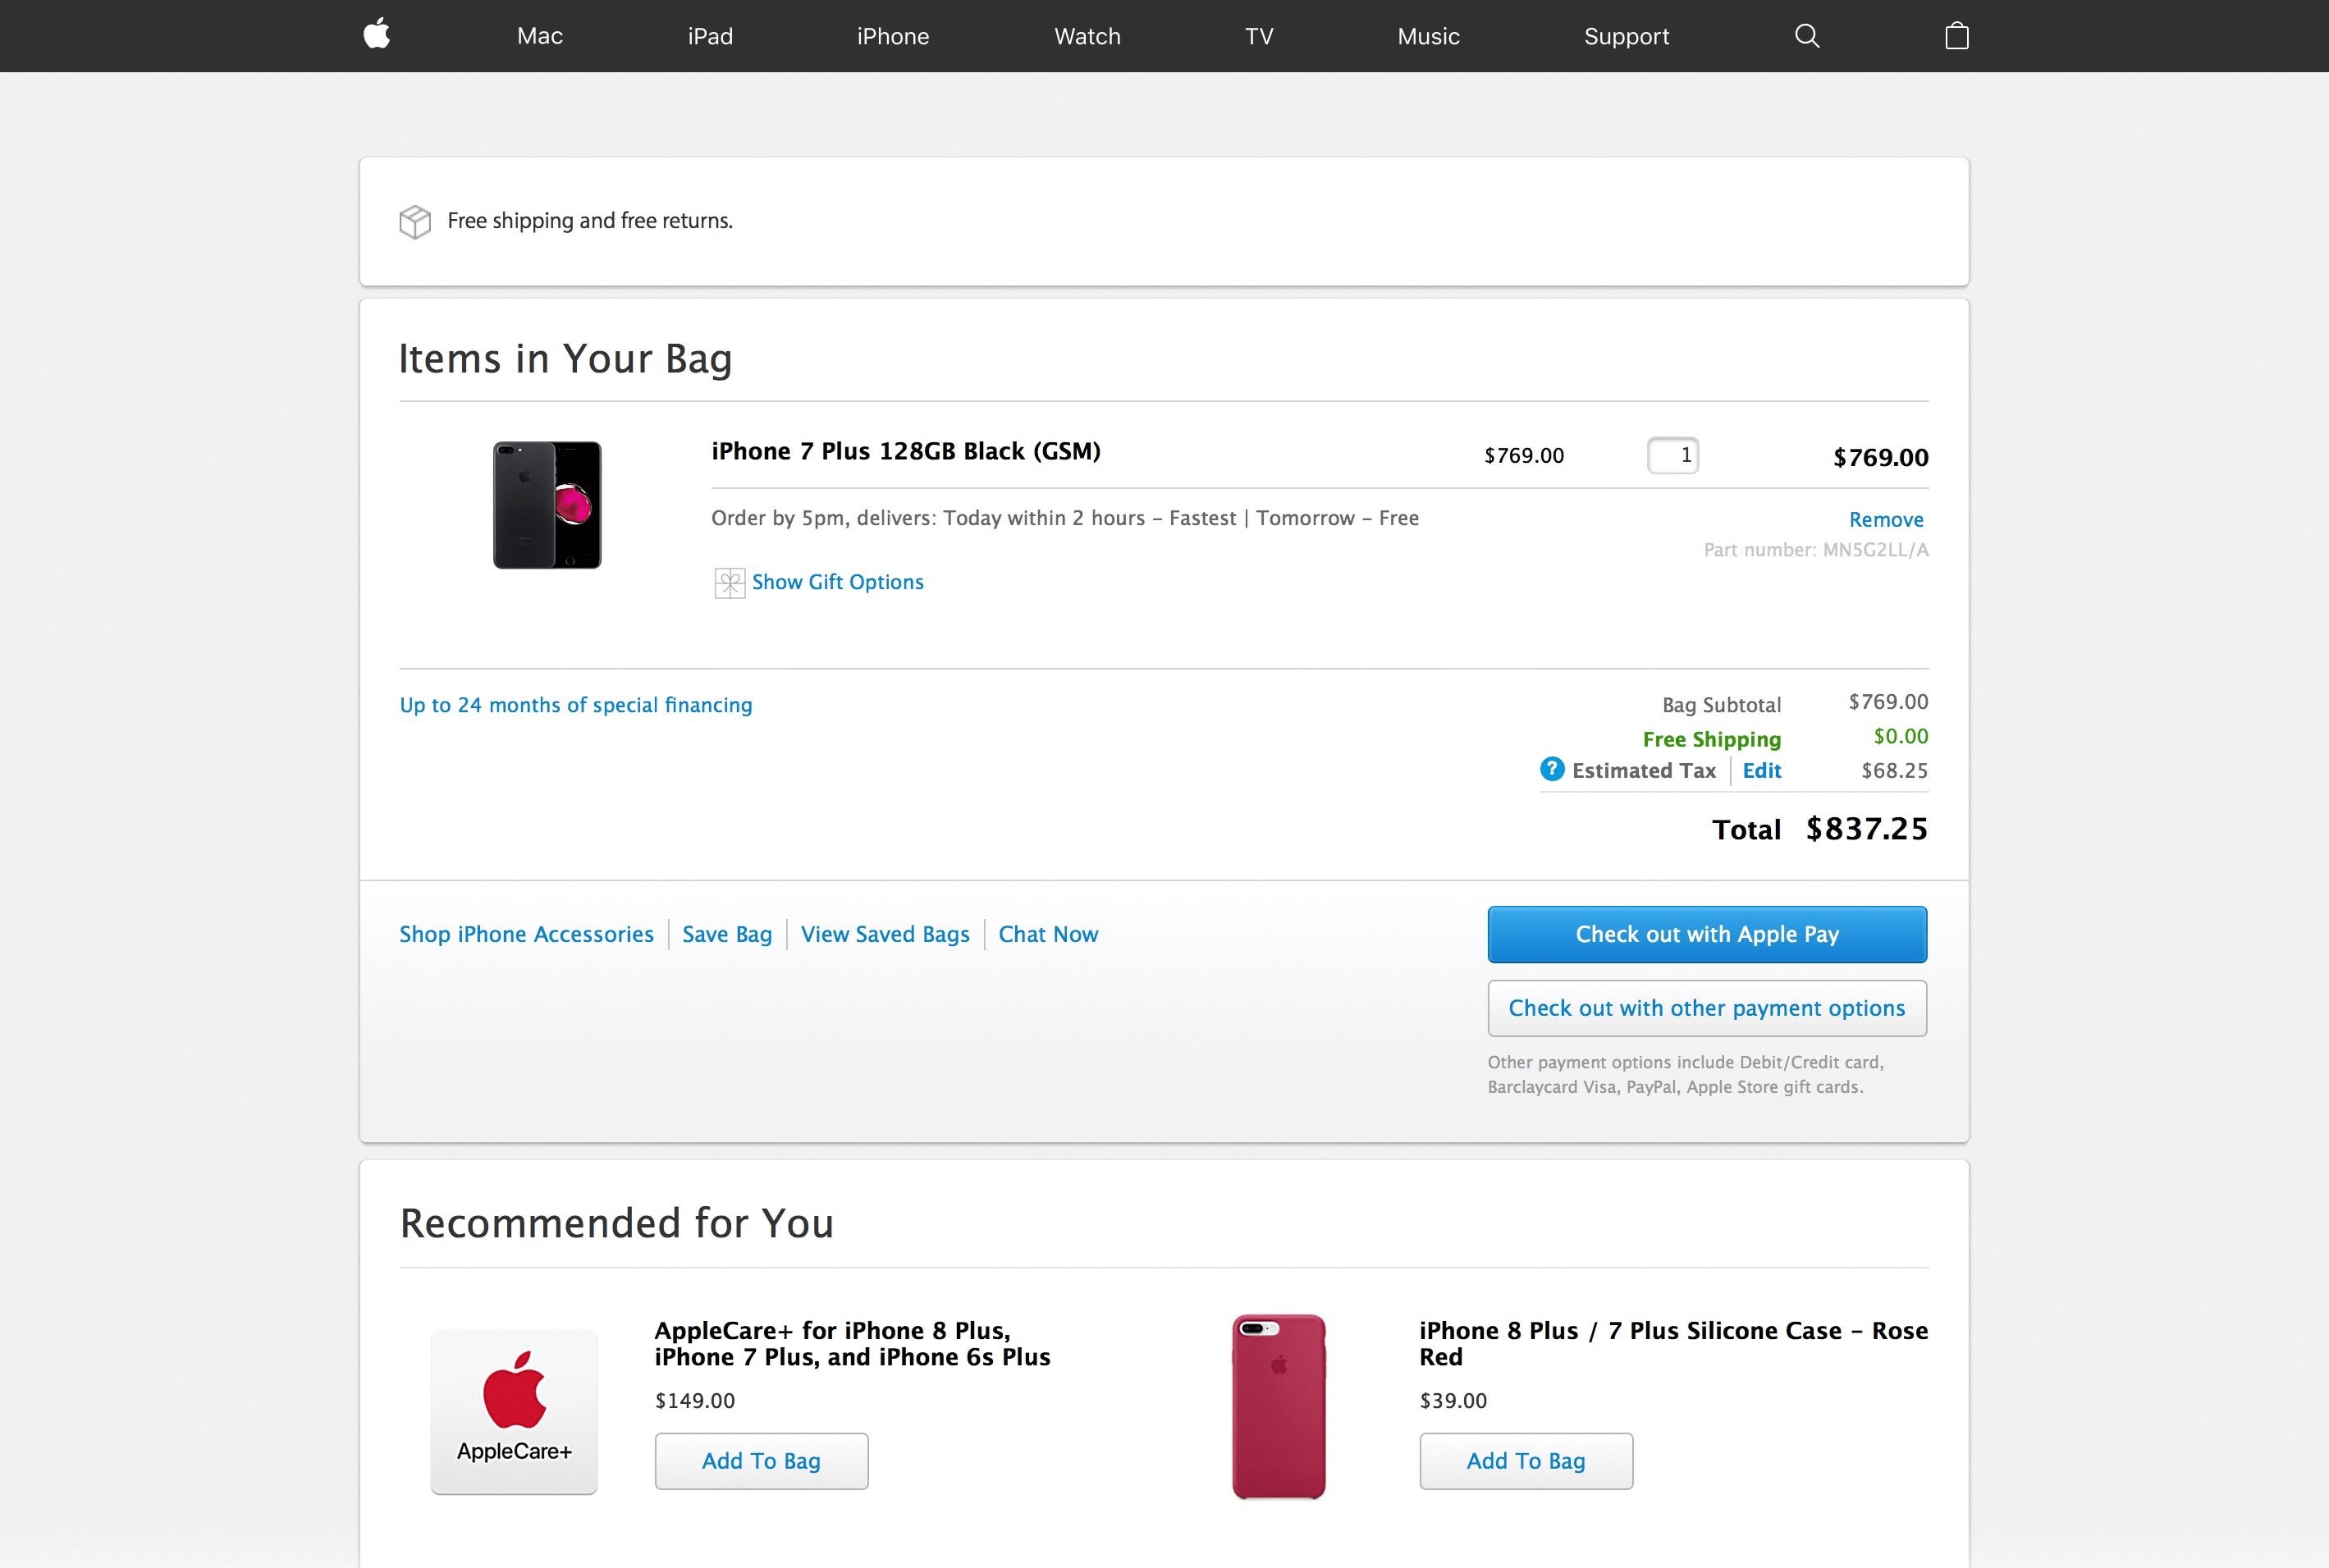 Tutorial on how to buy an Apple product on pre-order